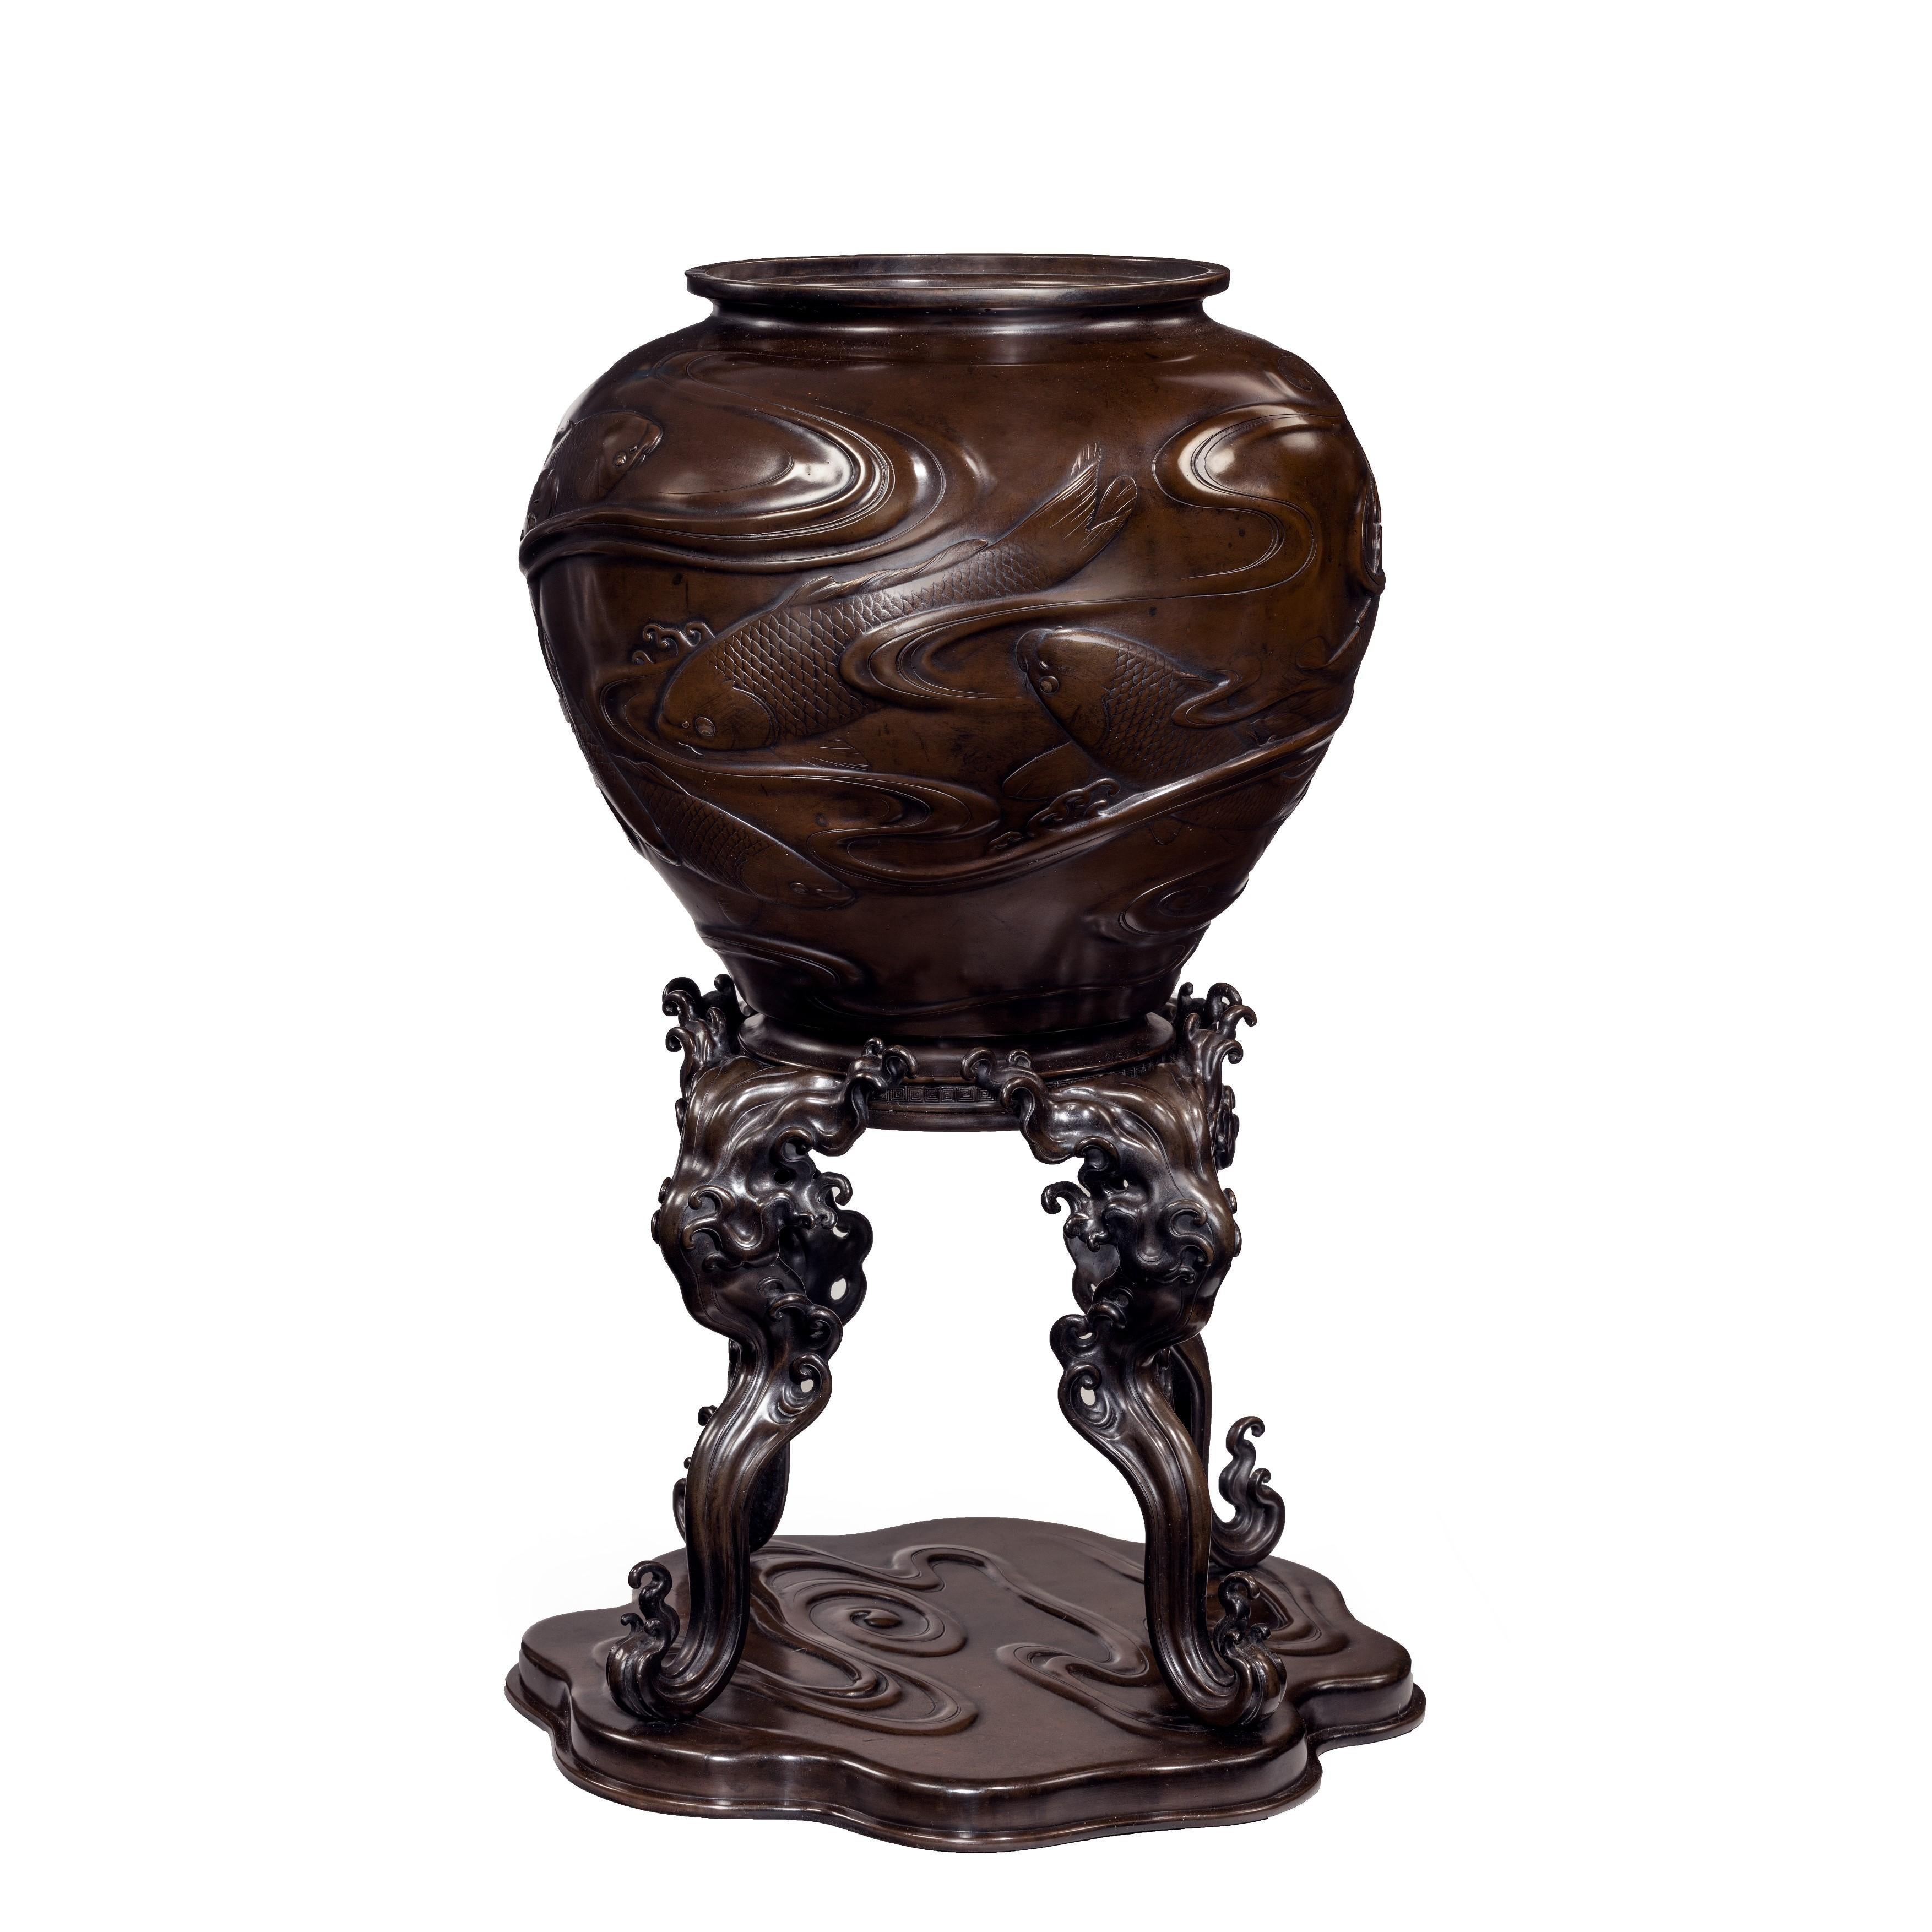 A large Meiji period bronze vase on stand, of globular form decorated with a continuous frieze of carp swimming in swirls of water, with gold-inlaid eyes, the base with four wave and spray legs on a shaped base with further raised ripples, signed